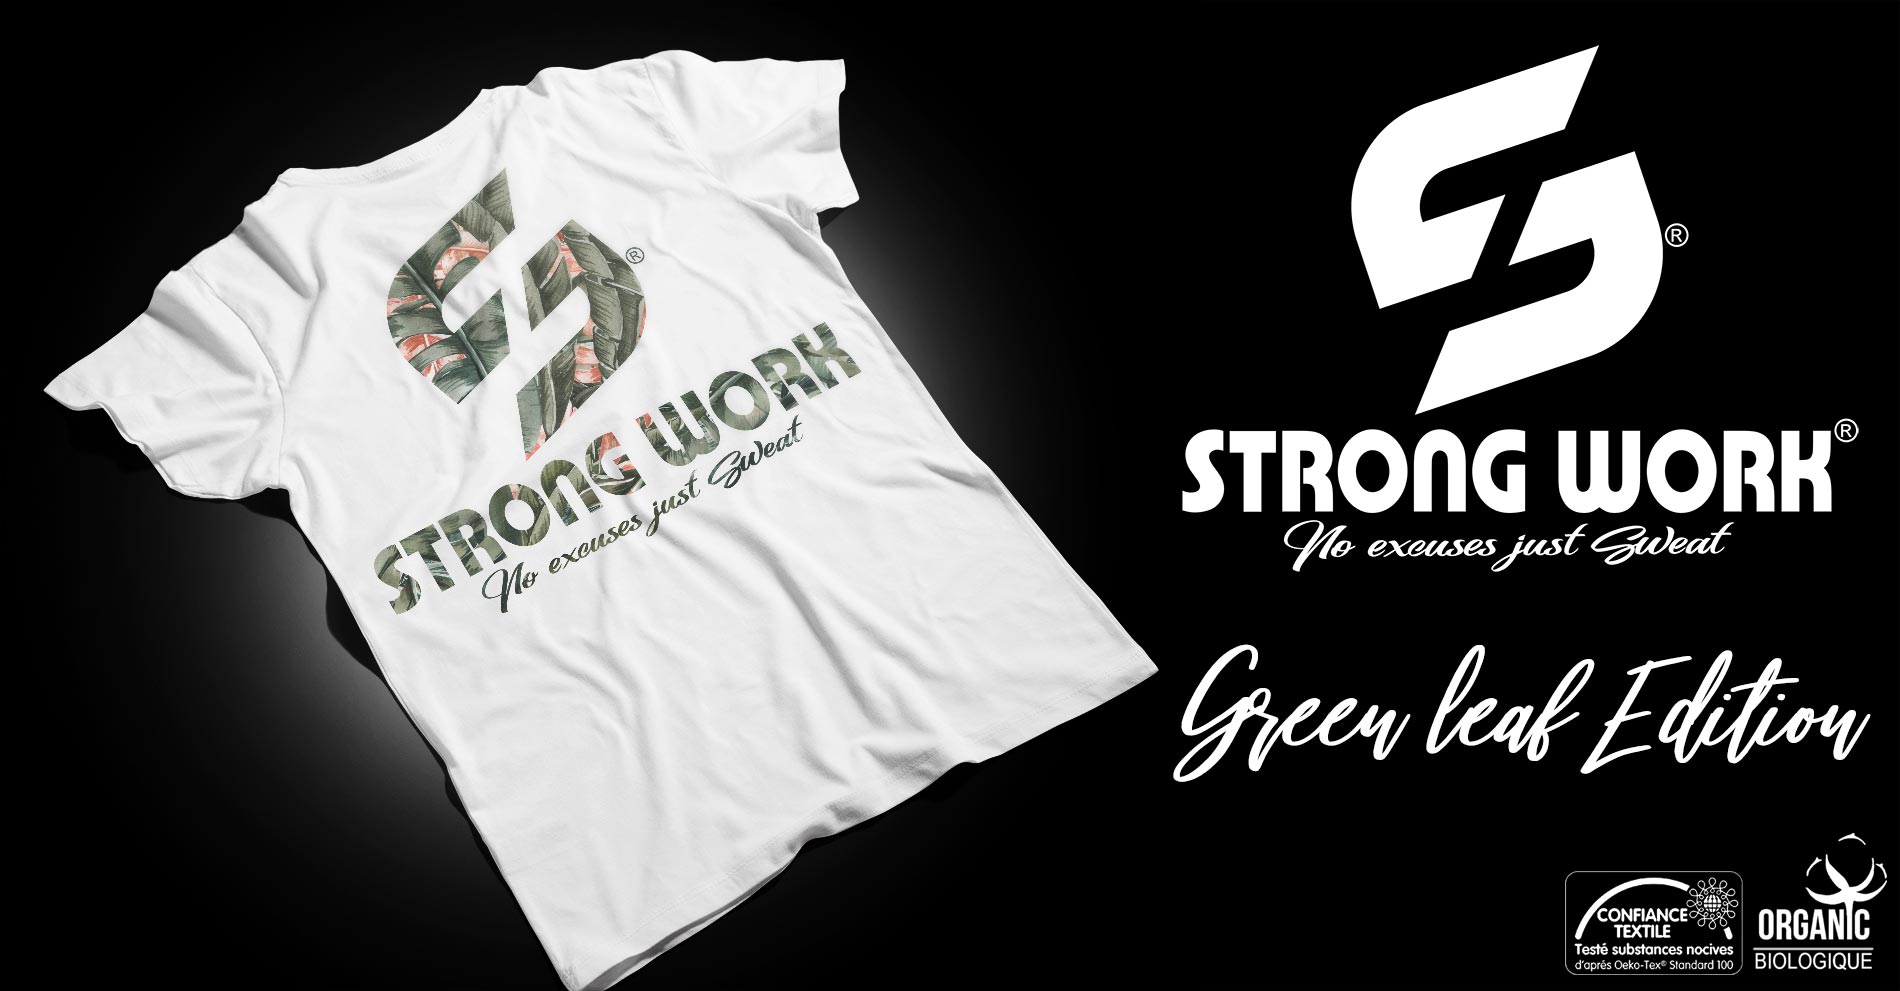 STRONG WORK GREEN LEAF EDITION FOR MEN - STRONG WORK SPORTSWEAR